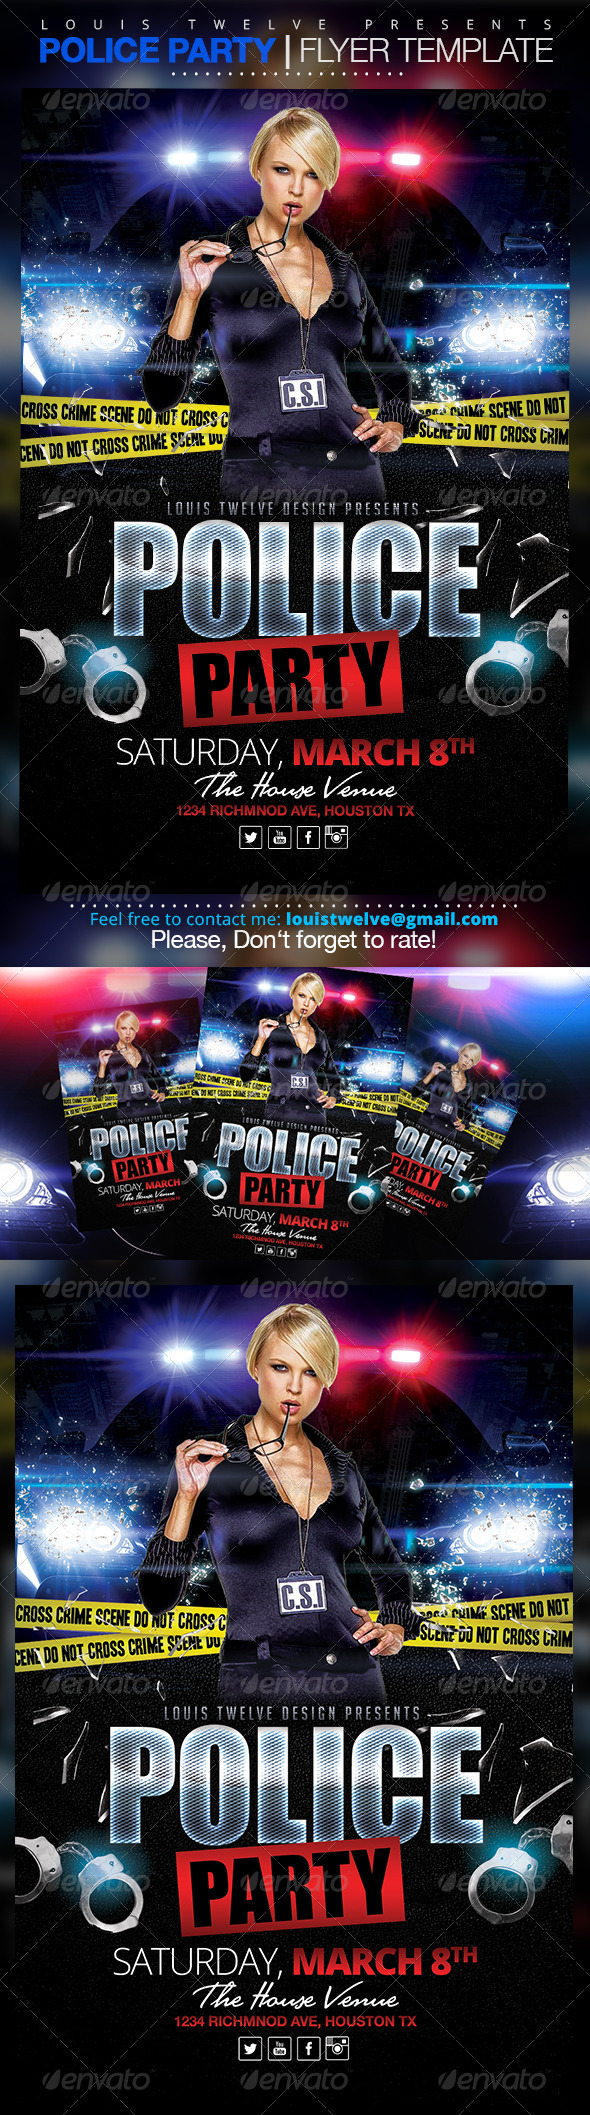 Police Party | Flyer Template